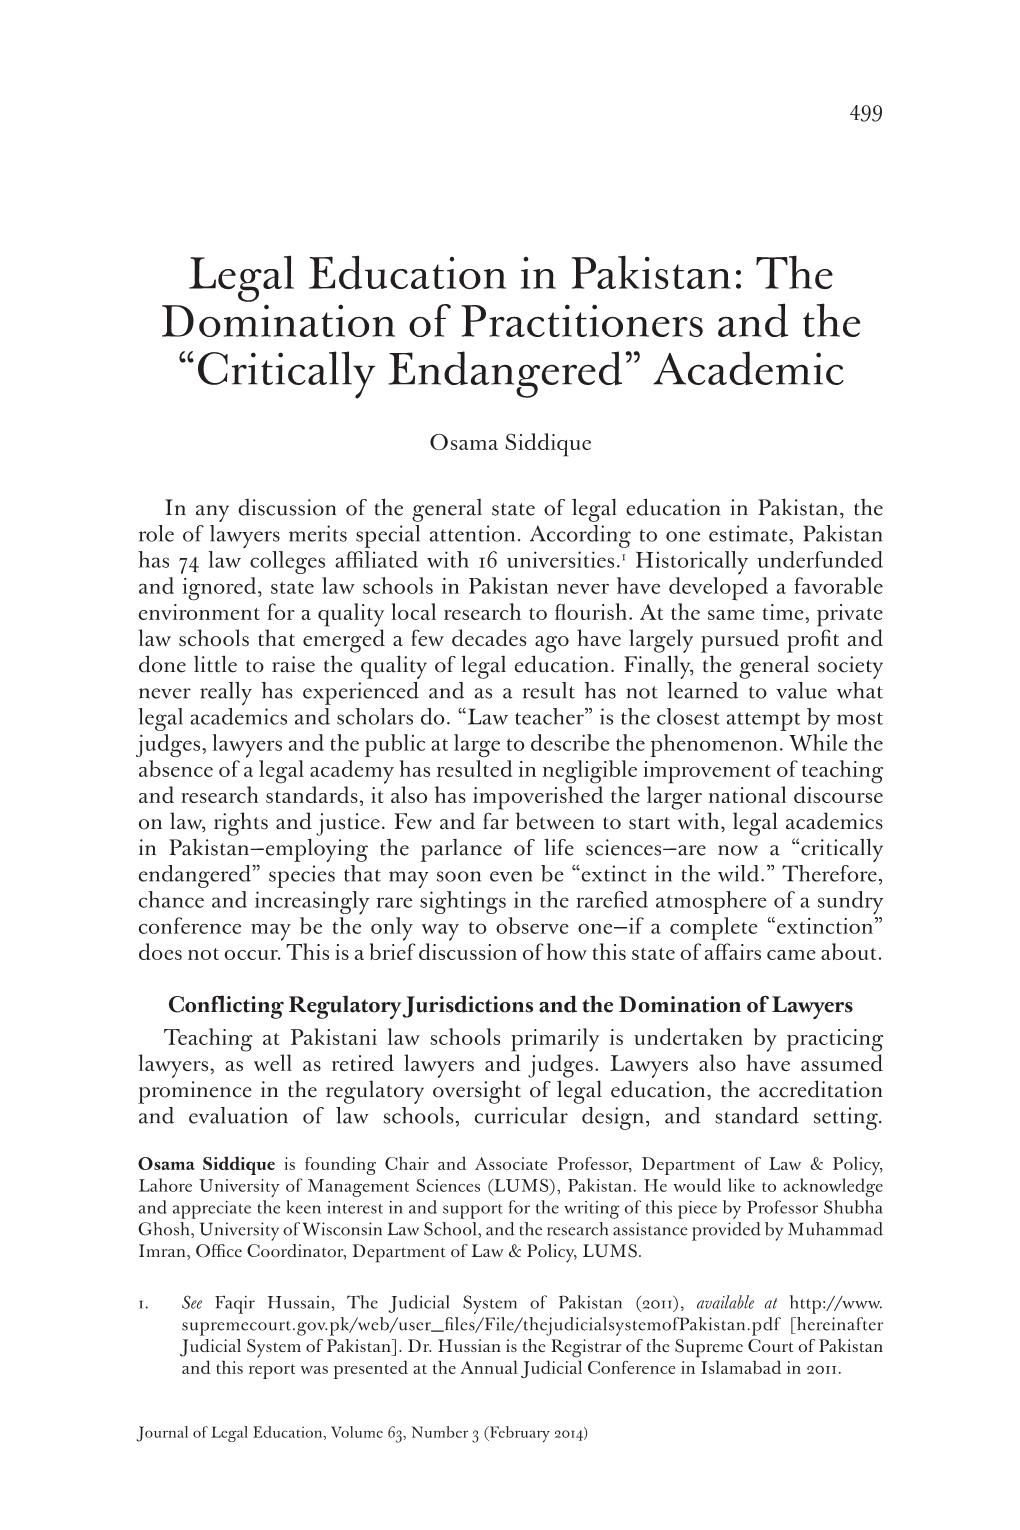 Legal Education in Pakistan: the Domination of Practitioners and the “Critically Endangered” Academic